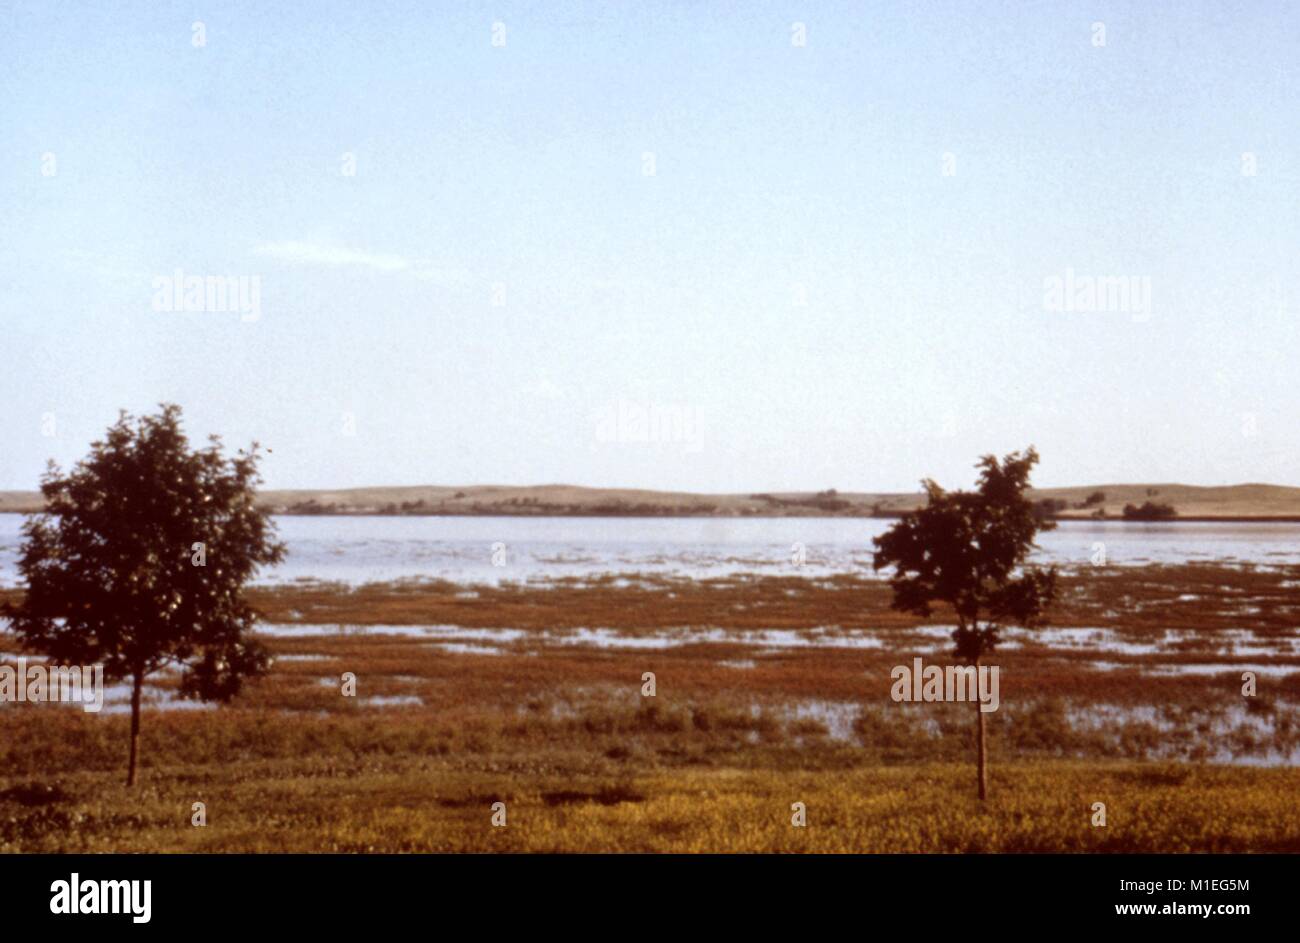 Landscape photograph of the marshy edge of a lake set in a flat, grassy area with two trees visible in the foreground and distant hills in the background, taken as part of an investigation into vector-borne diseases, Harlan County, Nebraska, 1976, 1976. Image courtesy CDC. () Stock Photo